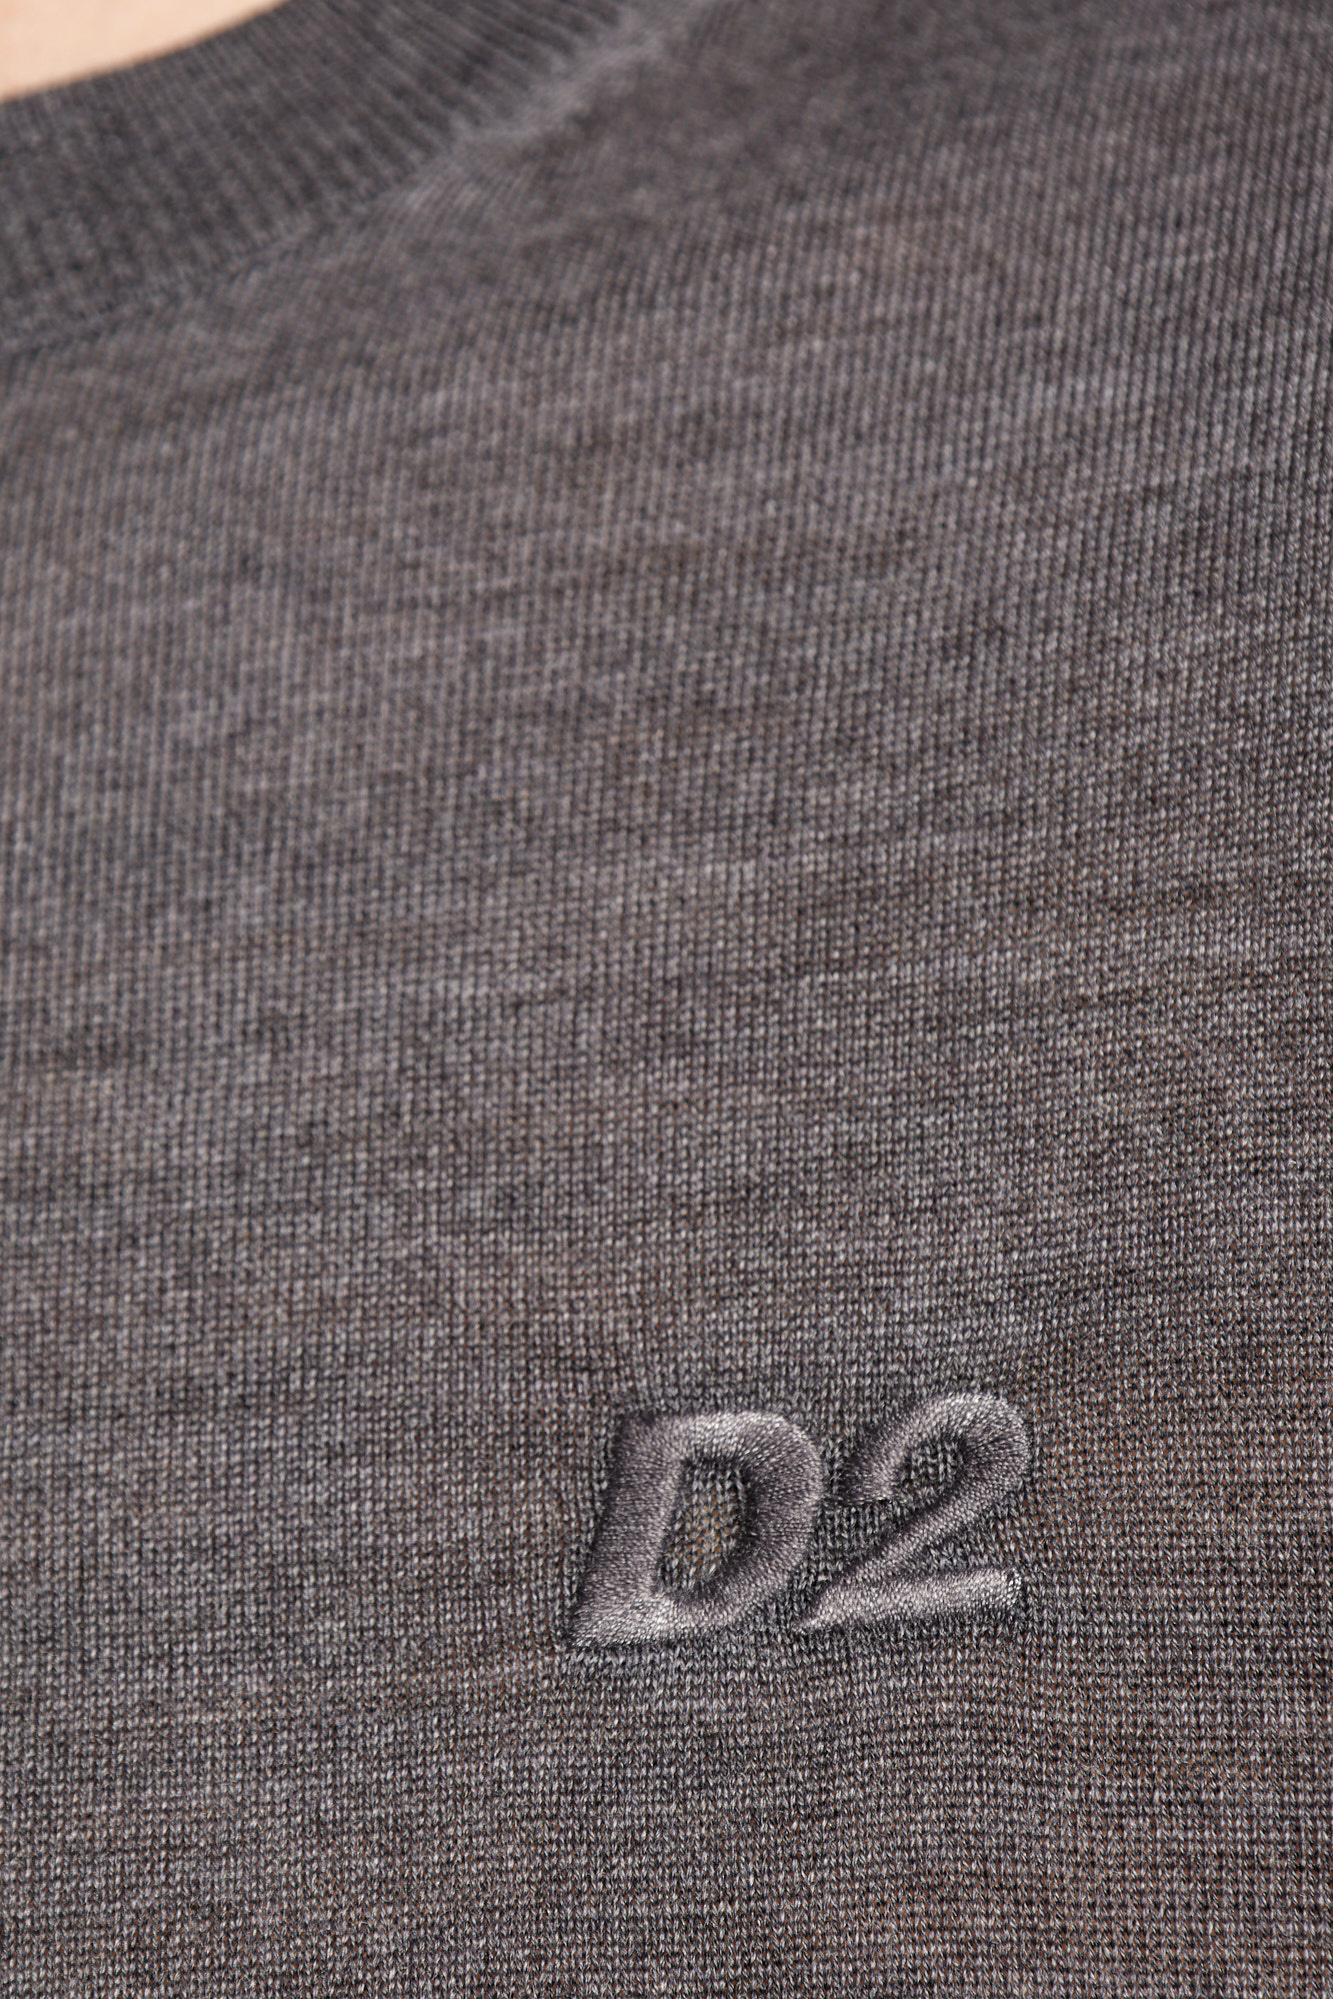 Dsquared2 Wool sweater with logo